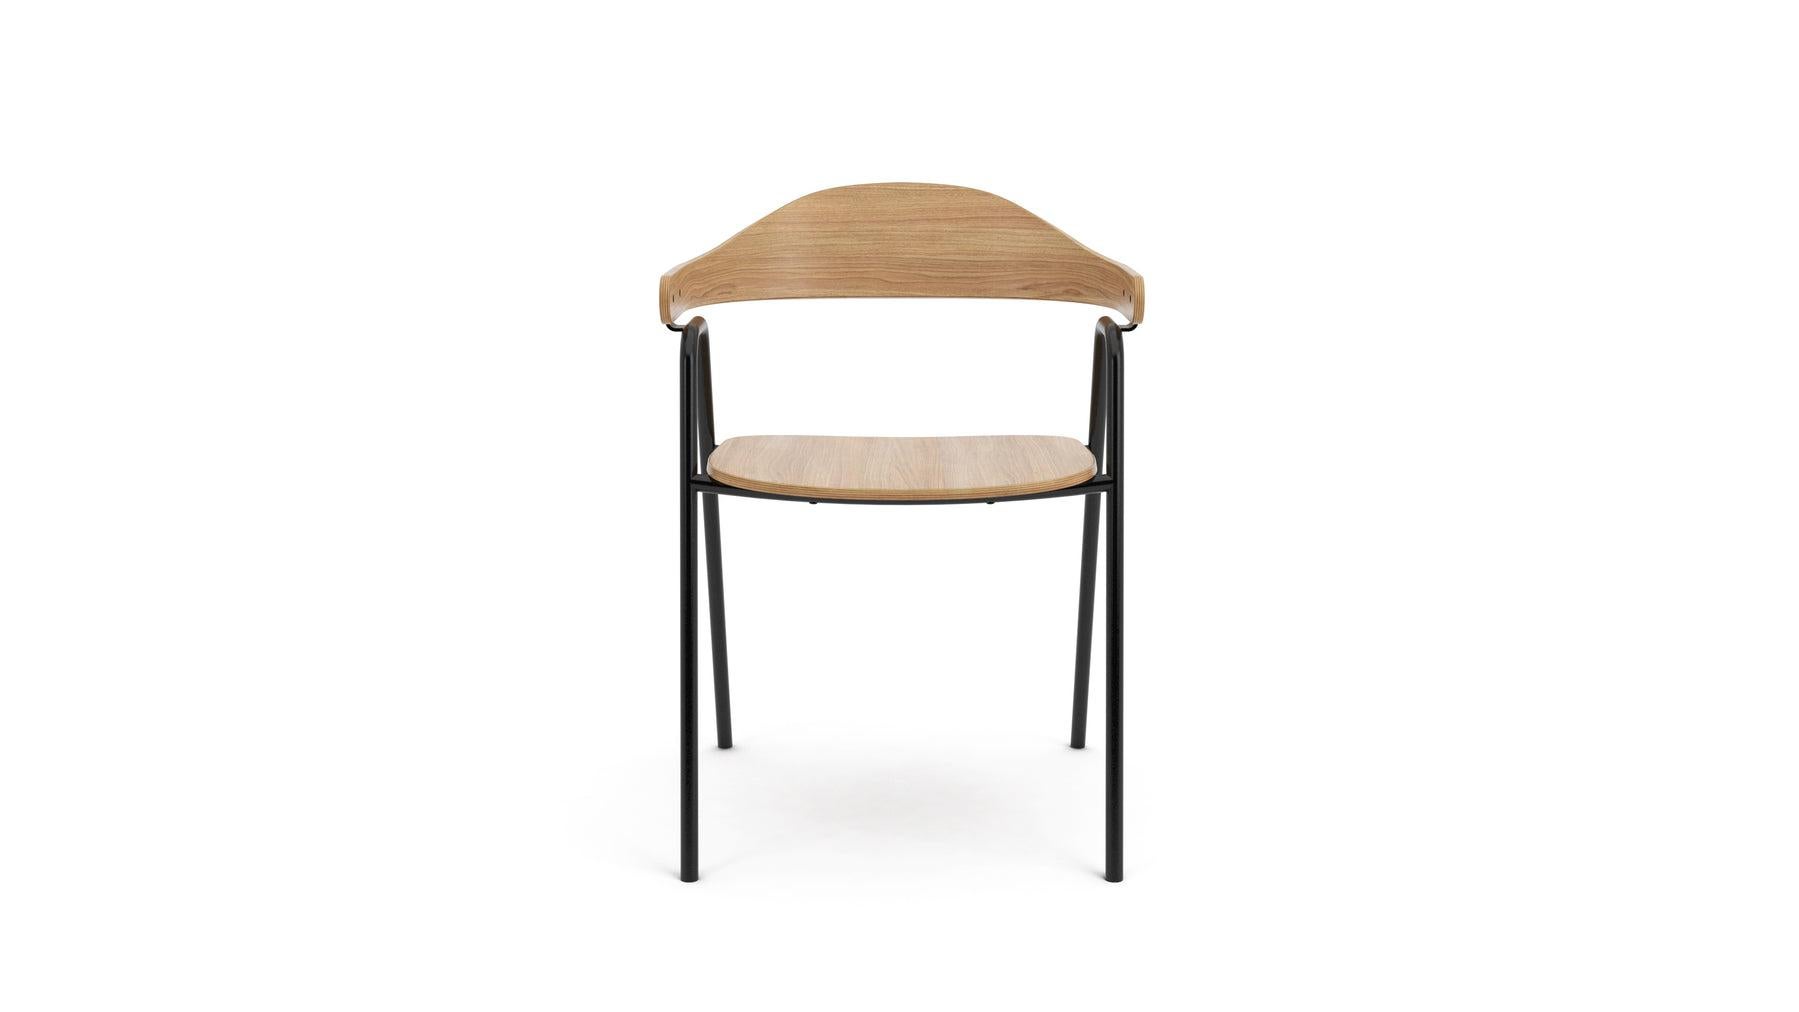 Metalwork Hayche Otto Chair, Oak Plywood and Powder Coated Black Steel Frame, UK, In stock For Sale